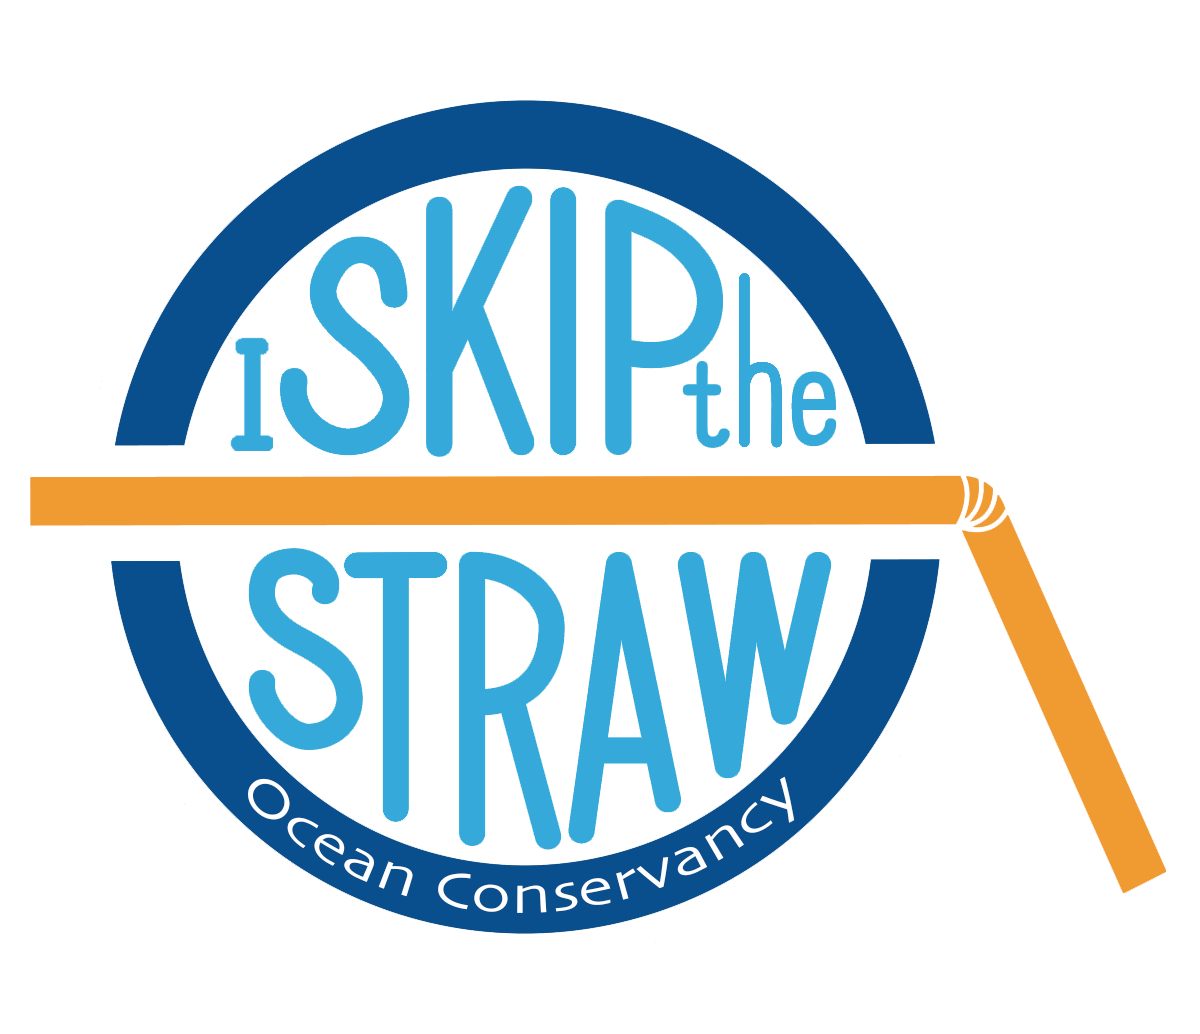 Quitting the Plastic Straw: 5 Ways to Stop Sucking - Sustainable Daisy